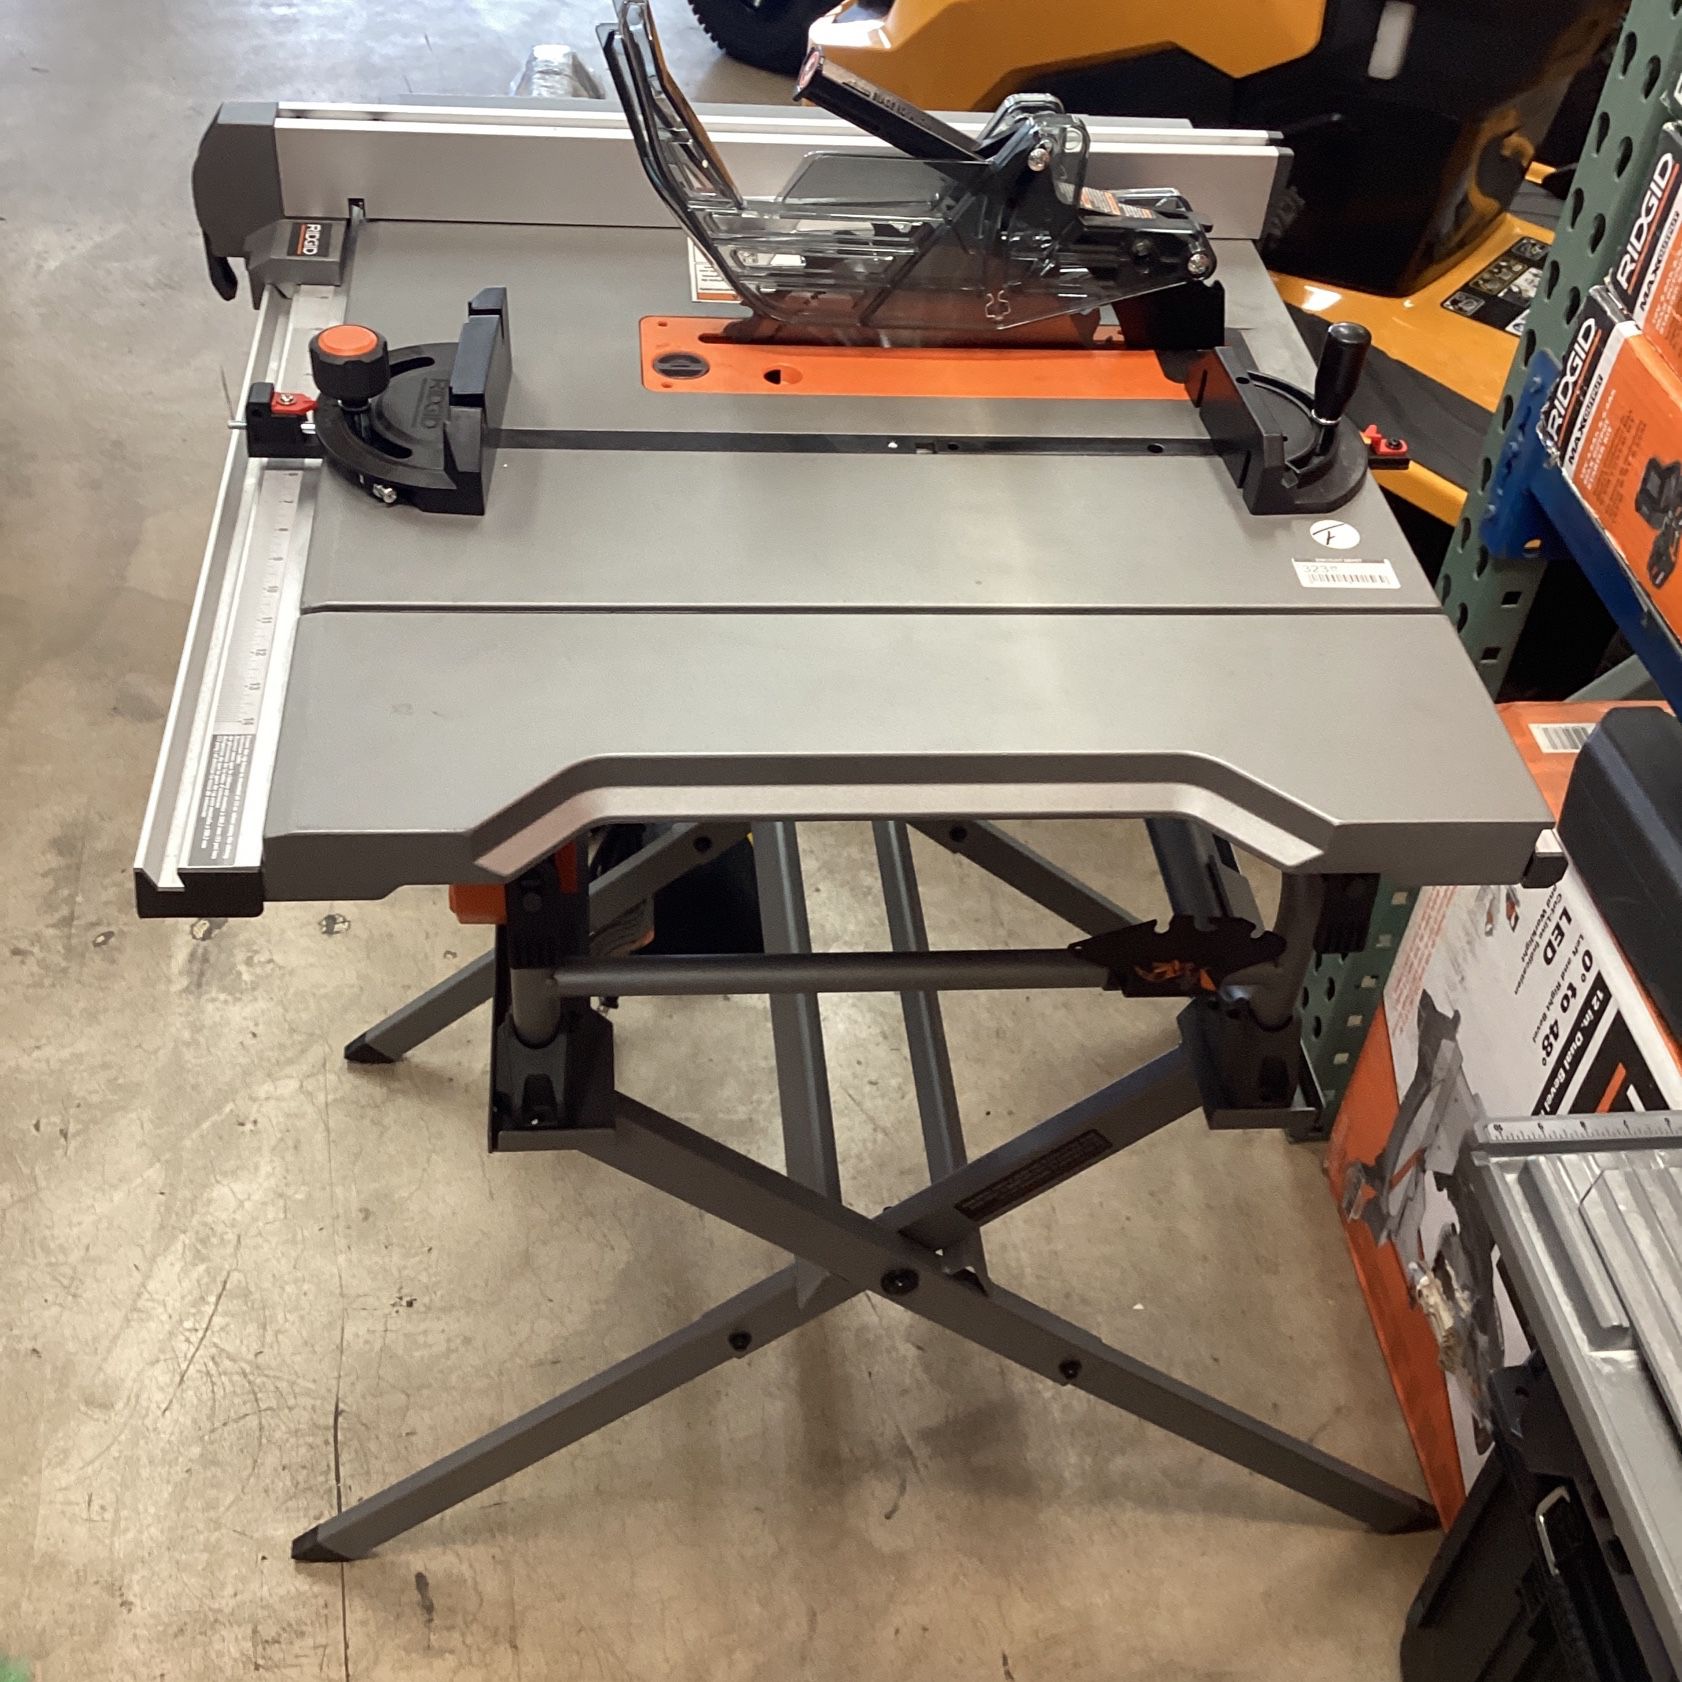 (New) RIDGID R4518 15 Amp 10 in. Table Saw with Folding Stand